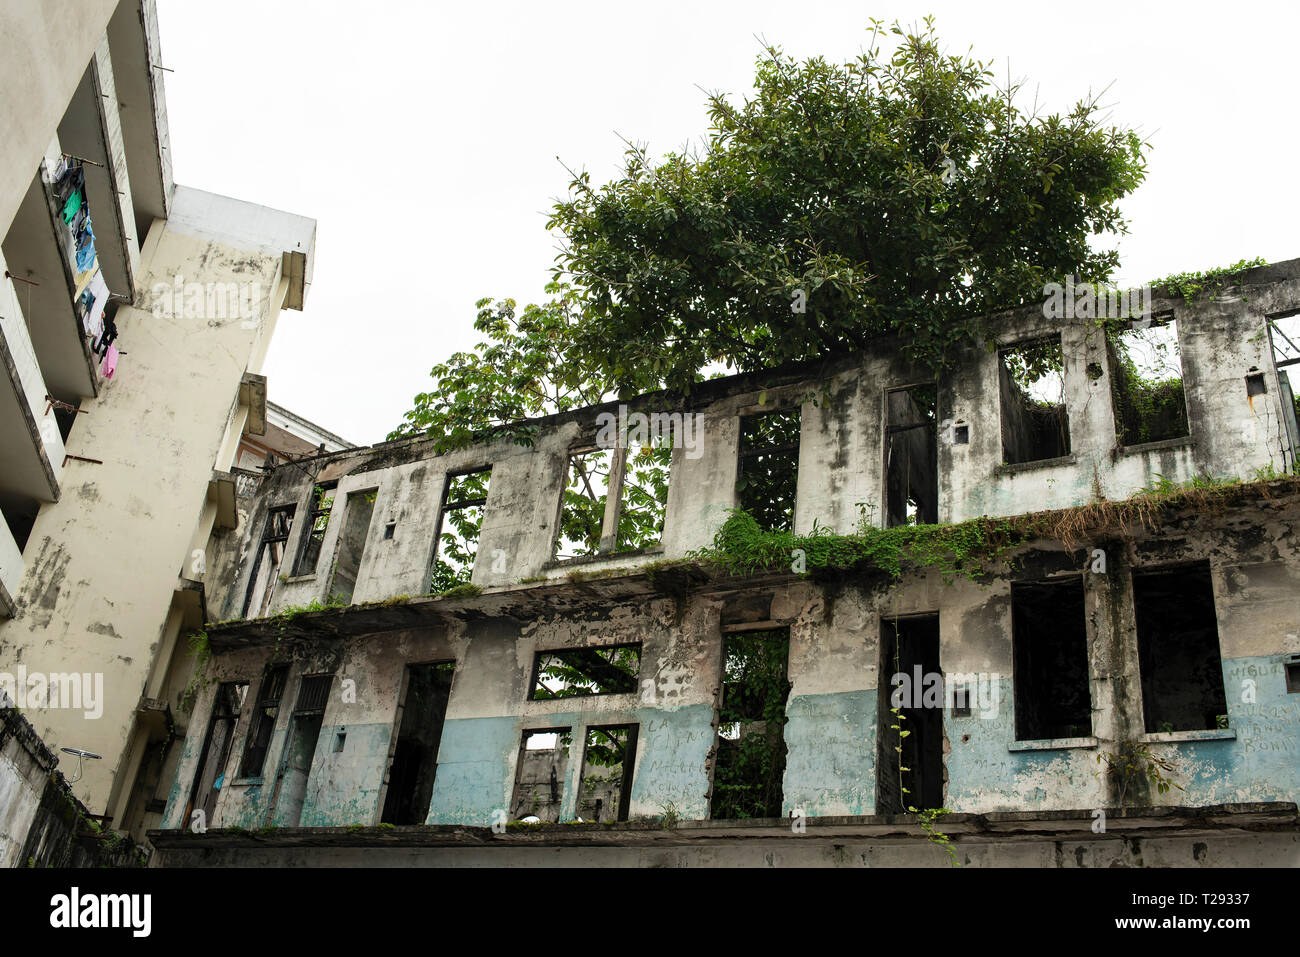 Derelict building next to a residential house. Photo taken from a courtyard in Casco Viejo, the historic town of Panama City, Panama. Oct 2018 Stock Photo